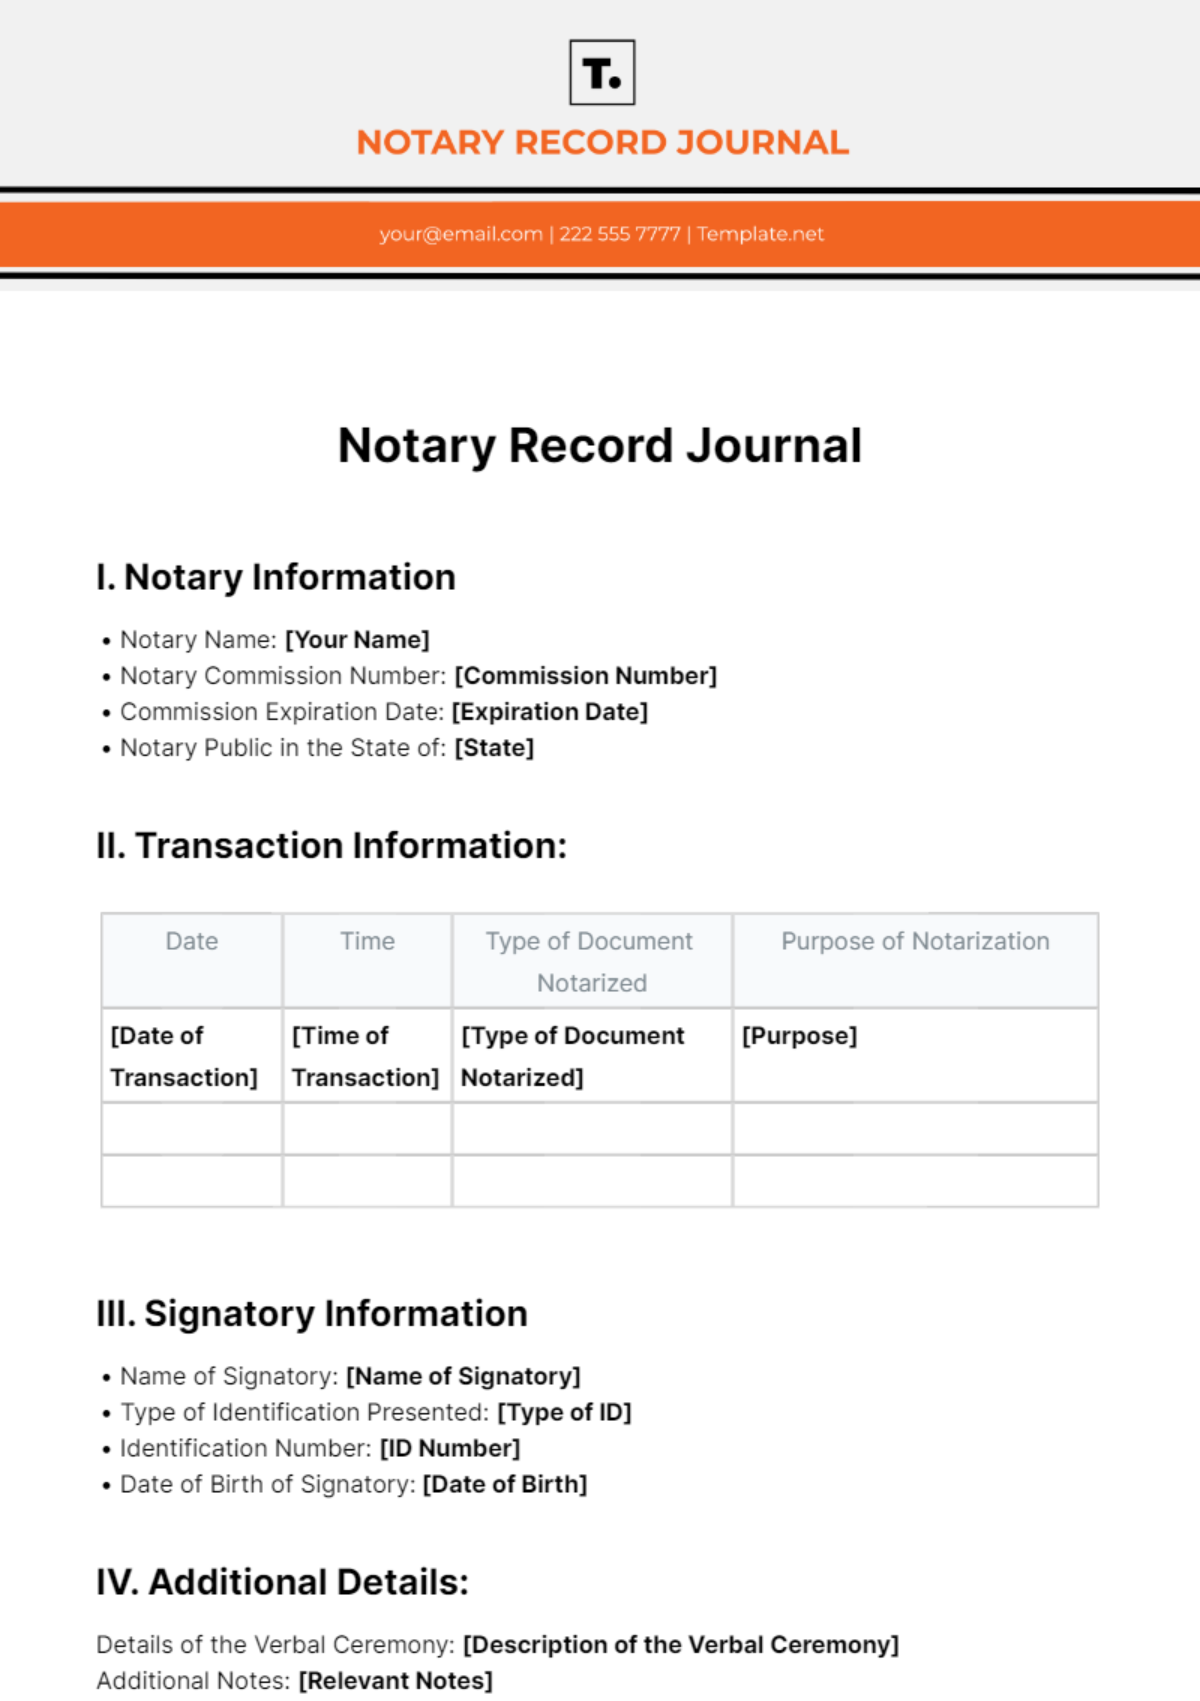 Notary Record Journal Template